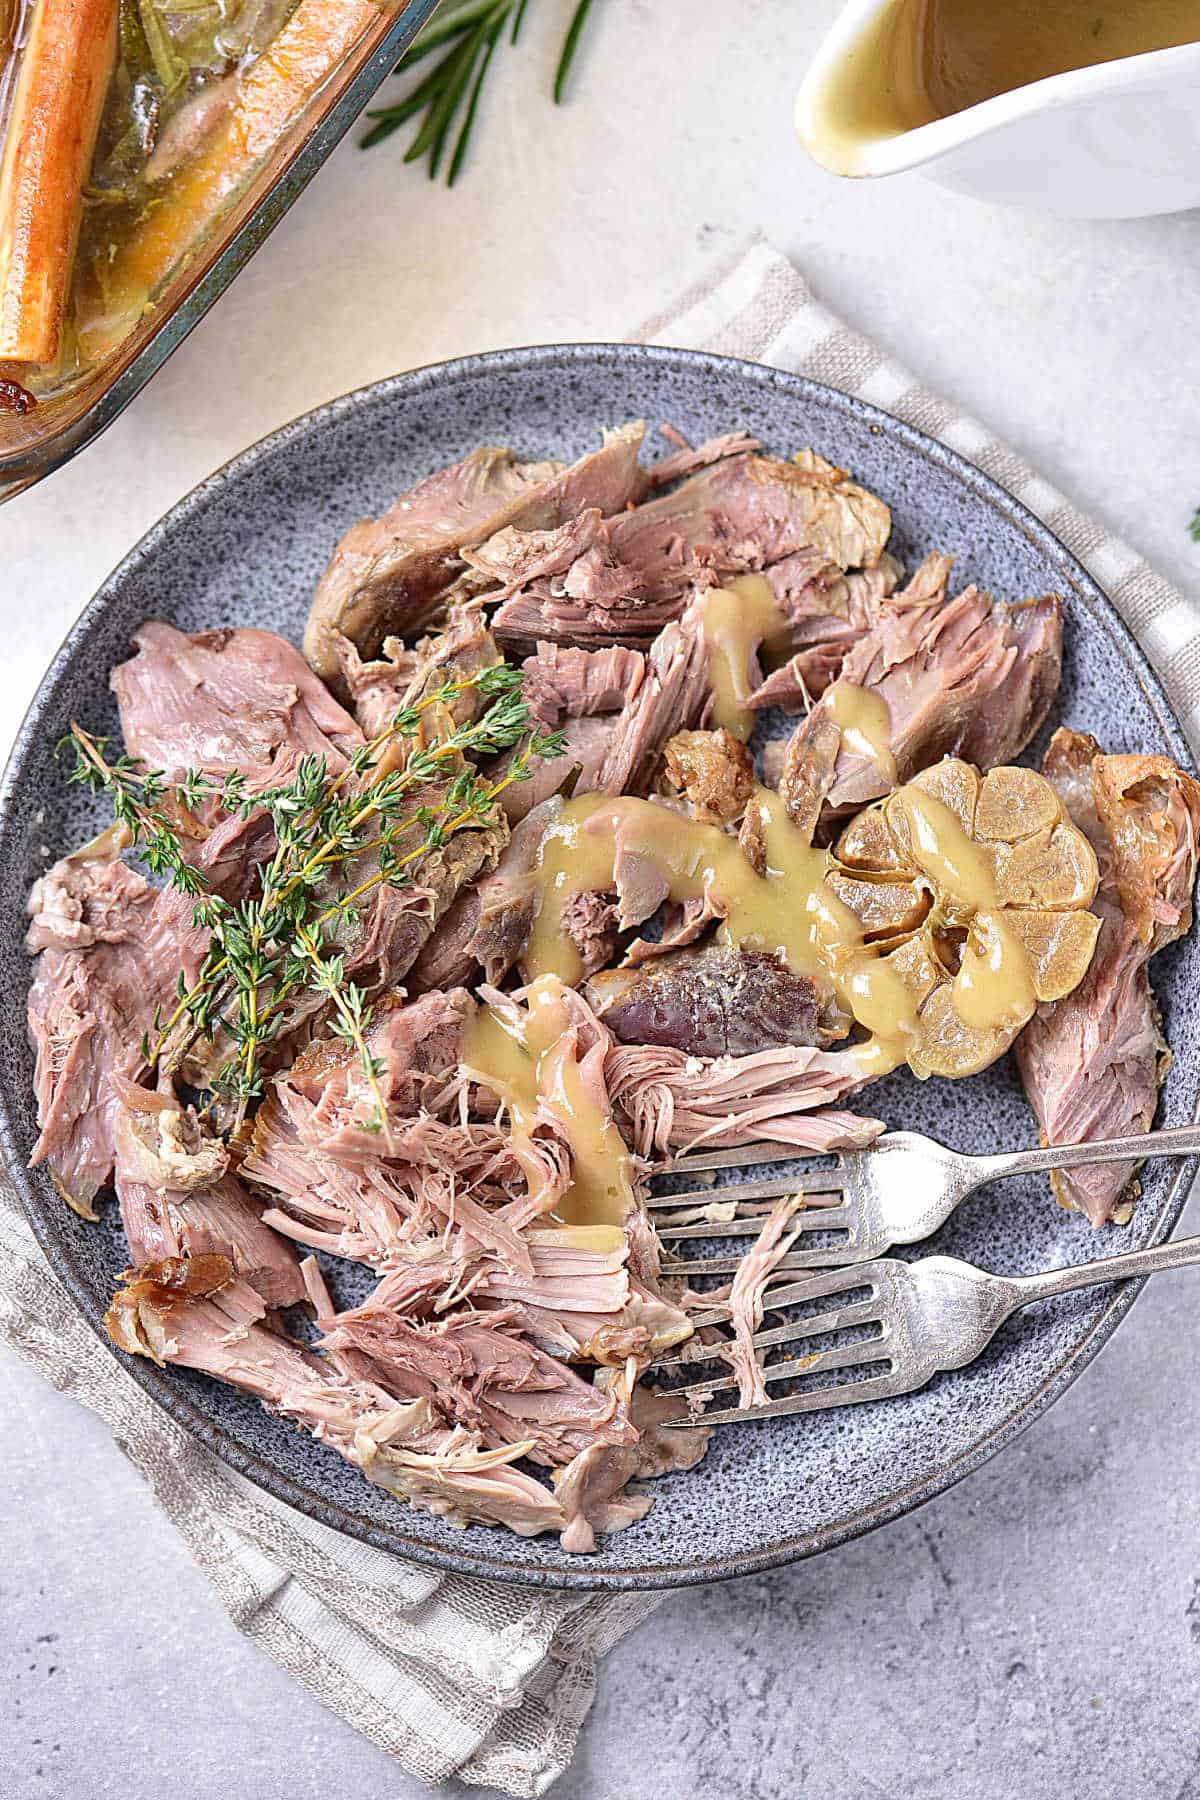 Serving of pulled-apart leg of lamb with gravy on a grey plate. Silver forks, light grey surface, striped cloth, gravy boat. 